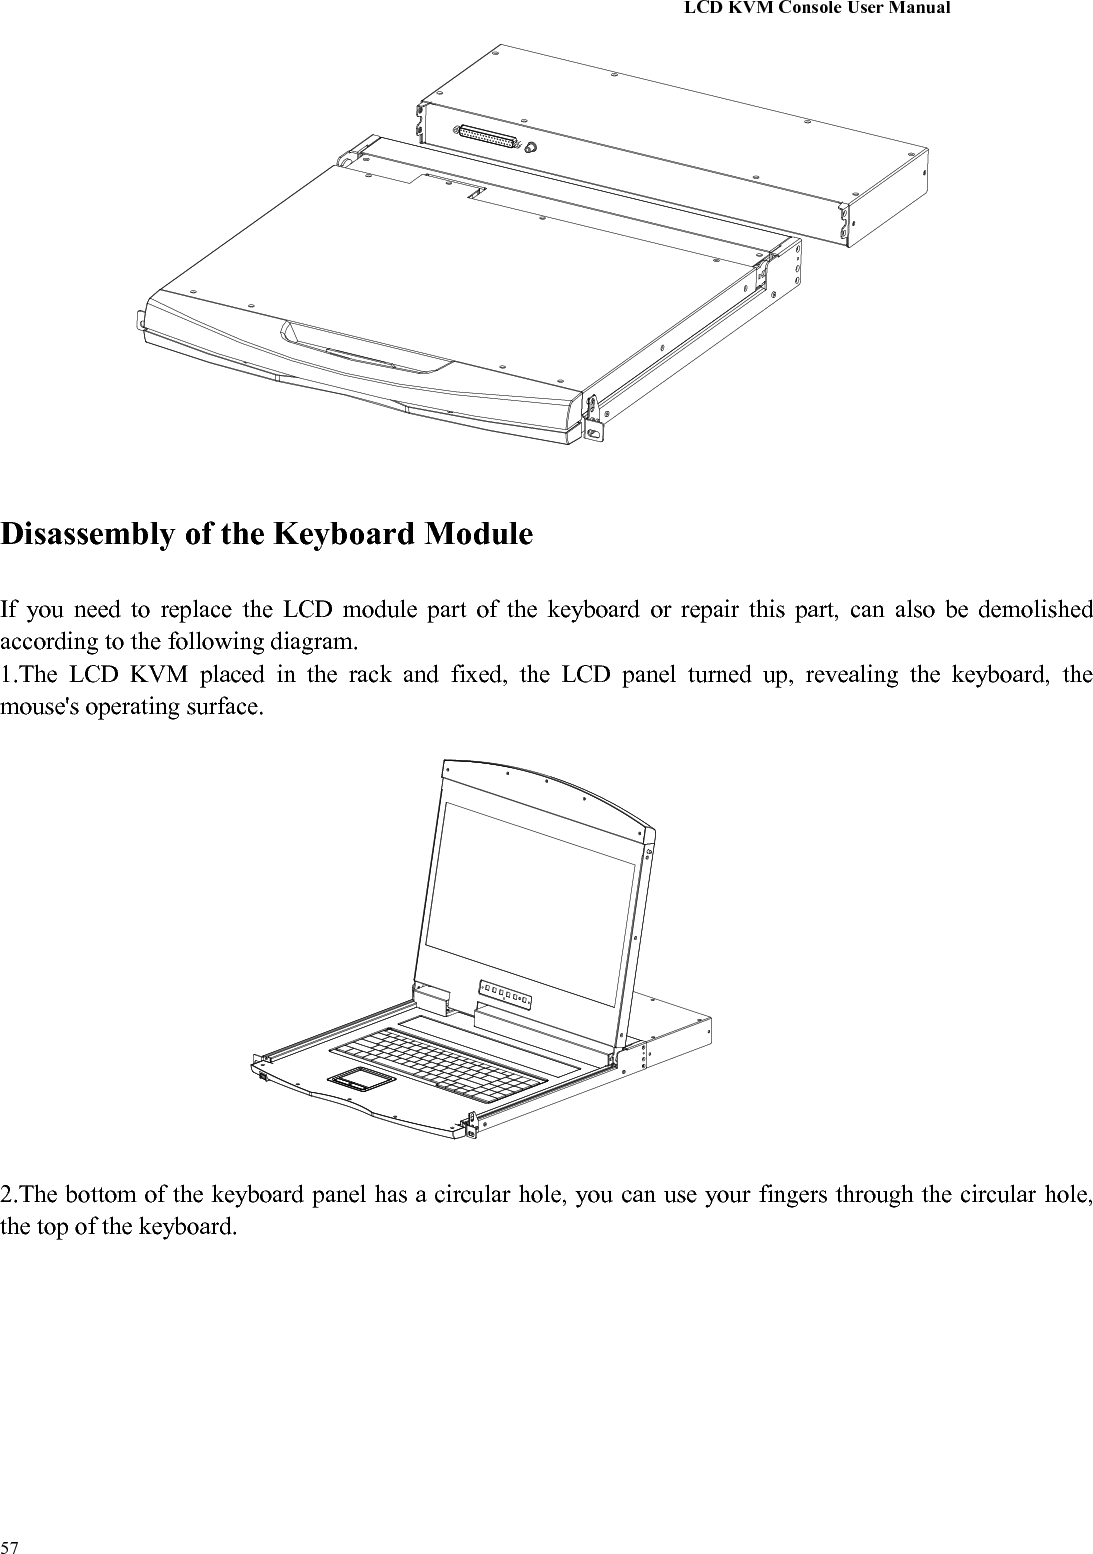 LCD KVM Console User Manual57Disassembly of the Keyboard ModuleIf you need to replace the LCD module part of the keyboard or repair this part, can also be demolishedaccording to the following diagram.1.The LCD KVM placed in the rack and fixed, the LCD panel turned up, revealing the keyboard, themouse&apos;s operating surface.2.The bottom of the keyboard panel has a circular hole, you can use your fingers through the circular hole,the top of the keyboard.